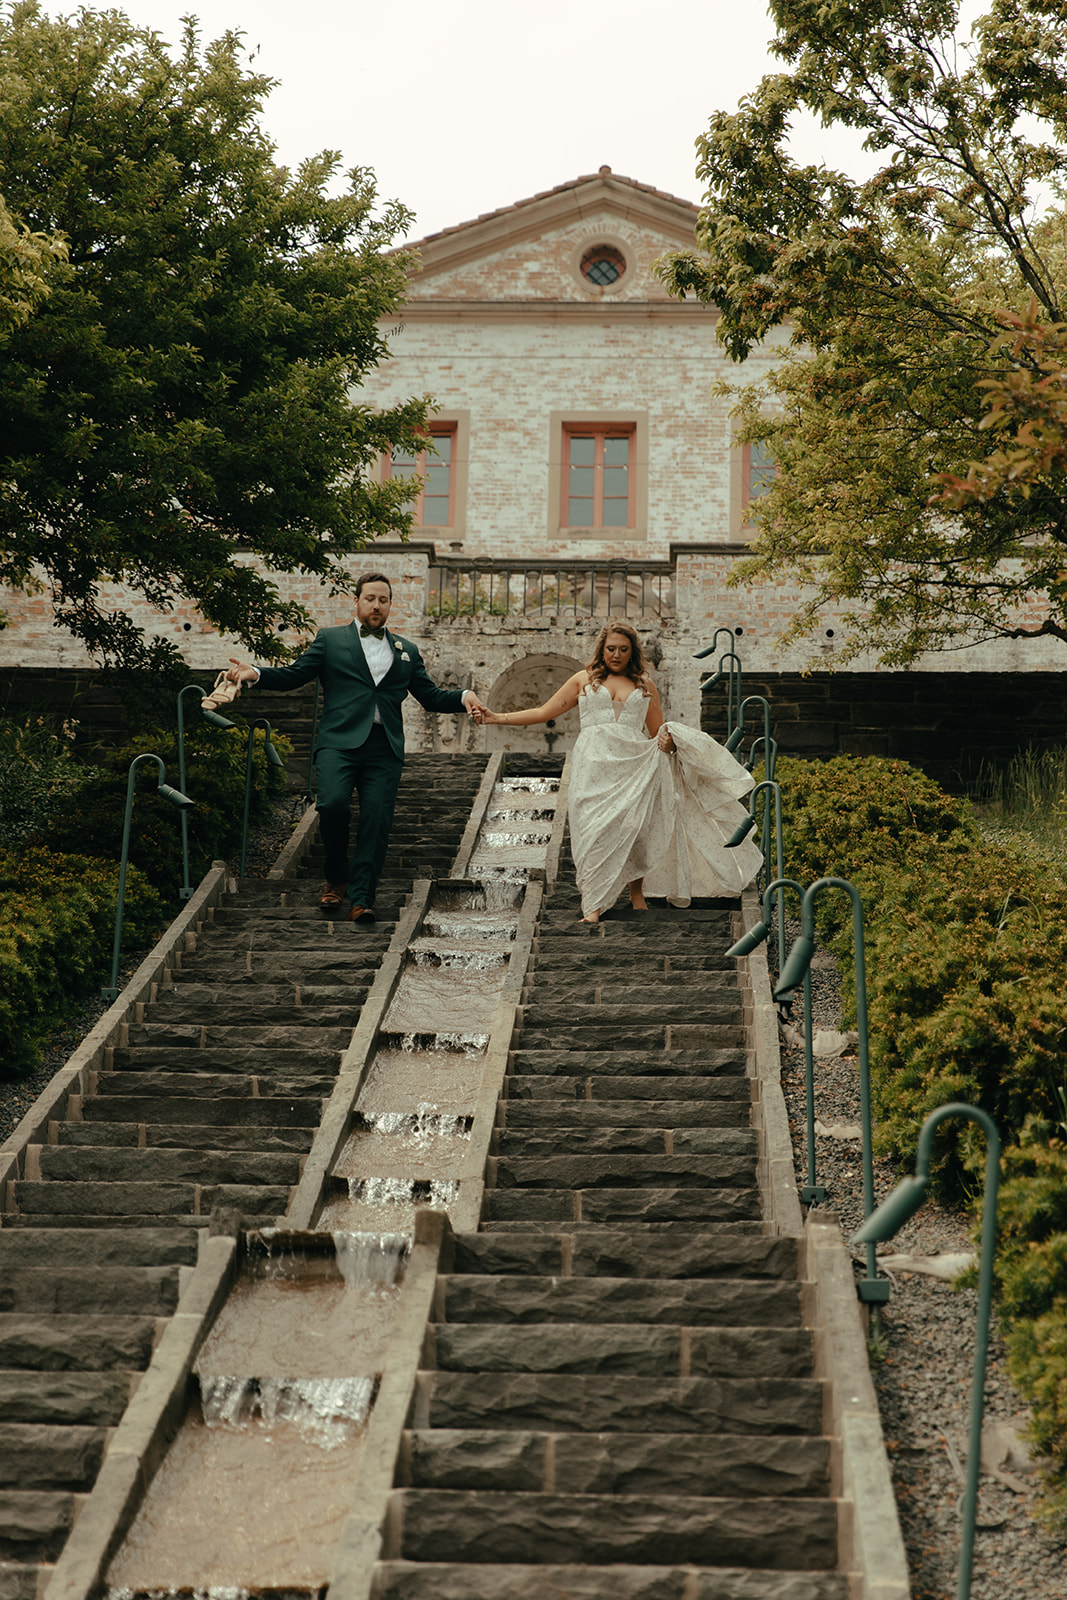 Couple walking down the steps at villa terrace